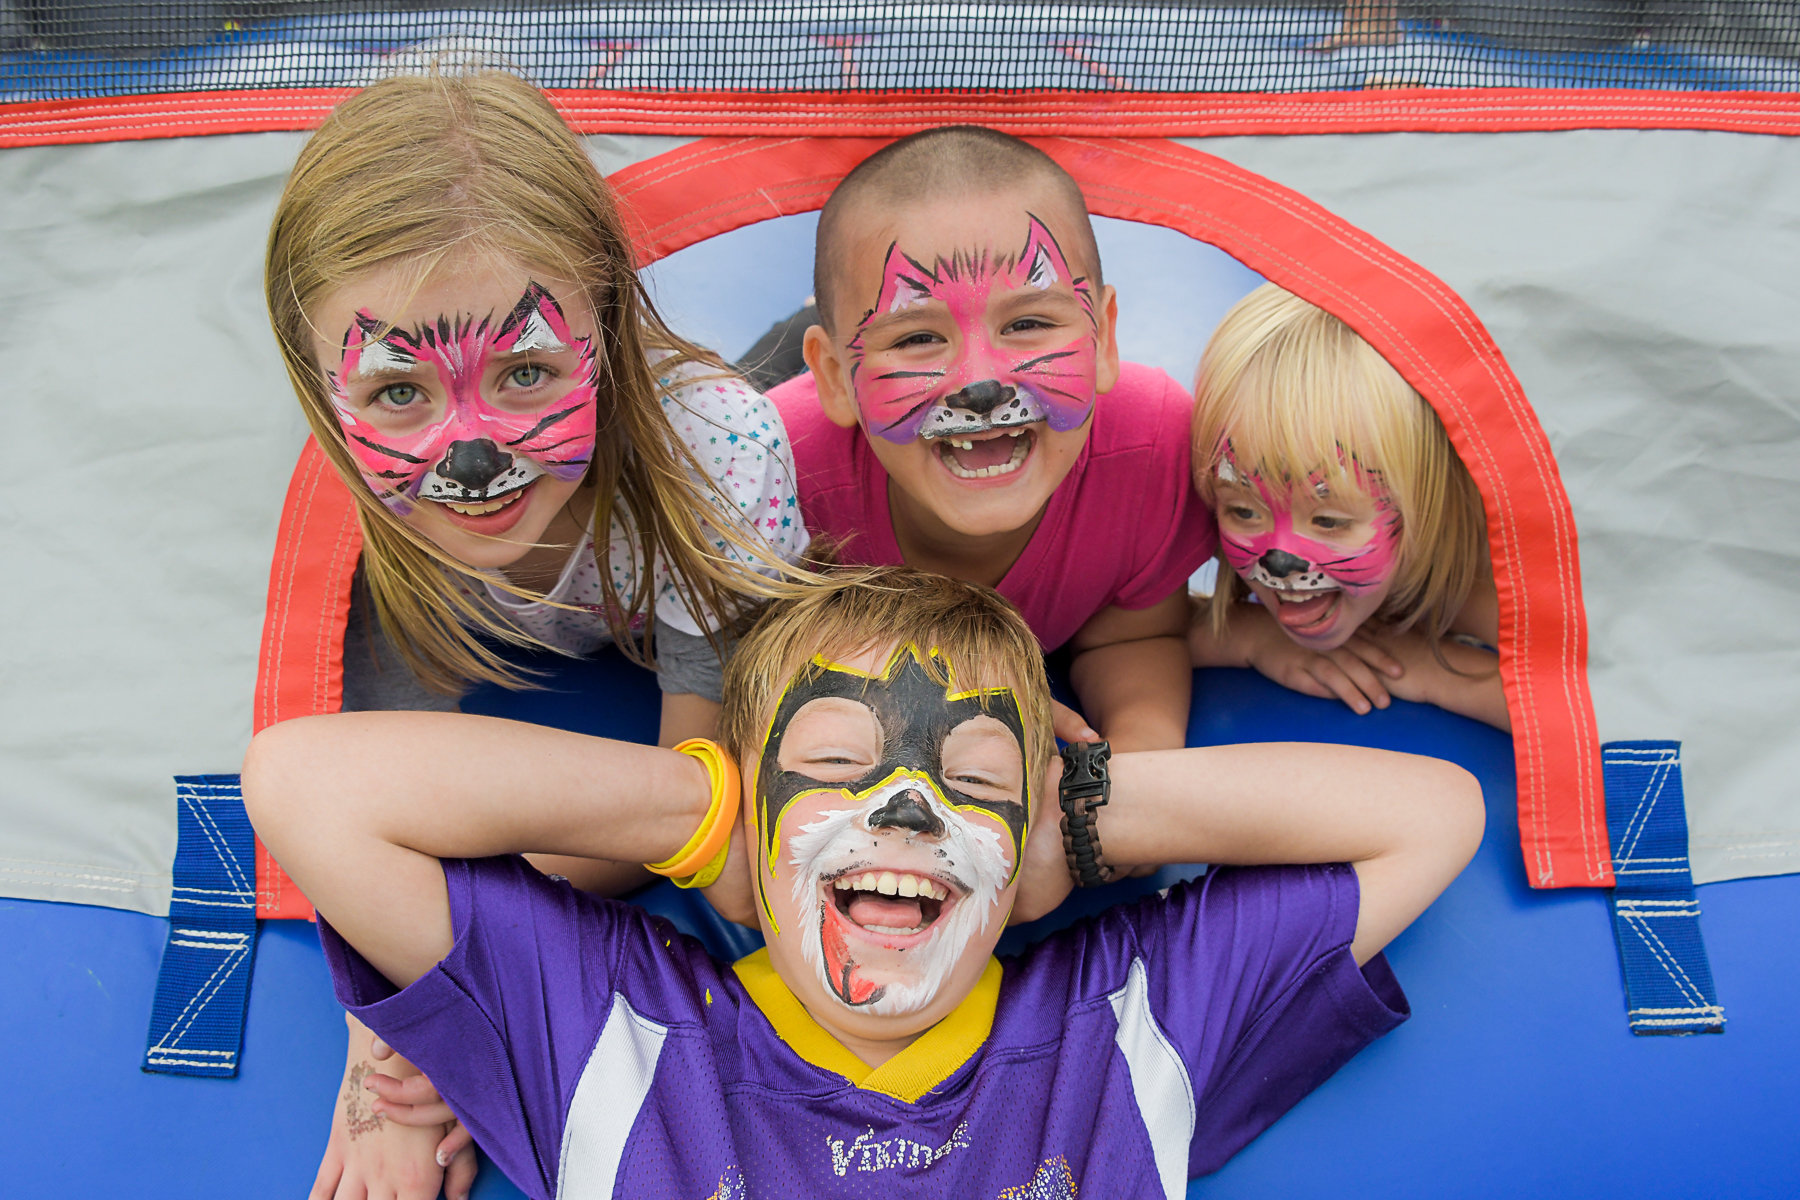 Four children smile while wearing face paint in a bouncy house